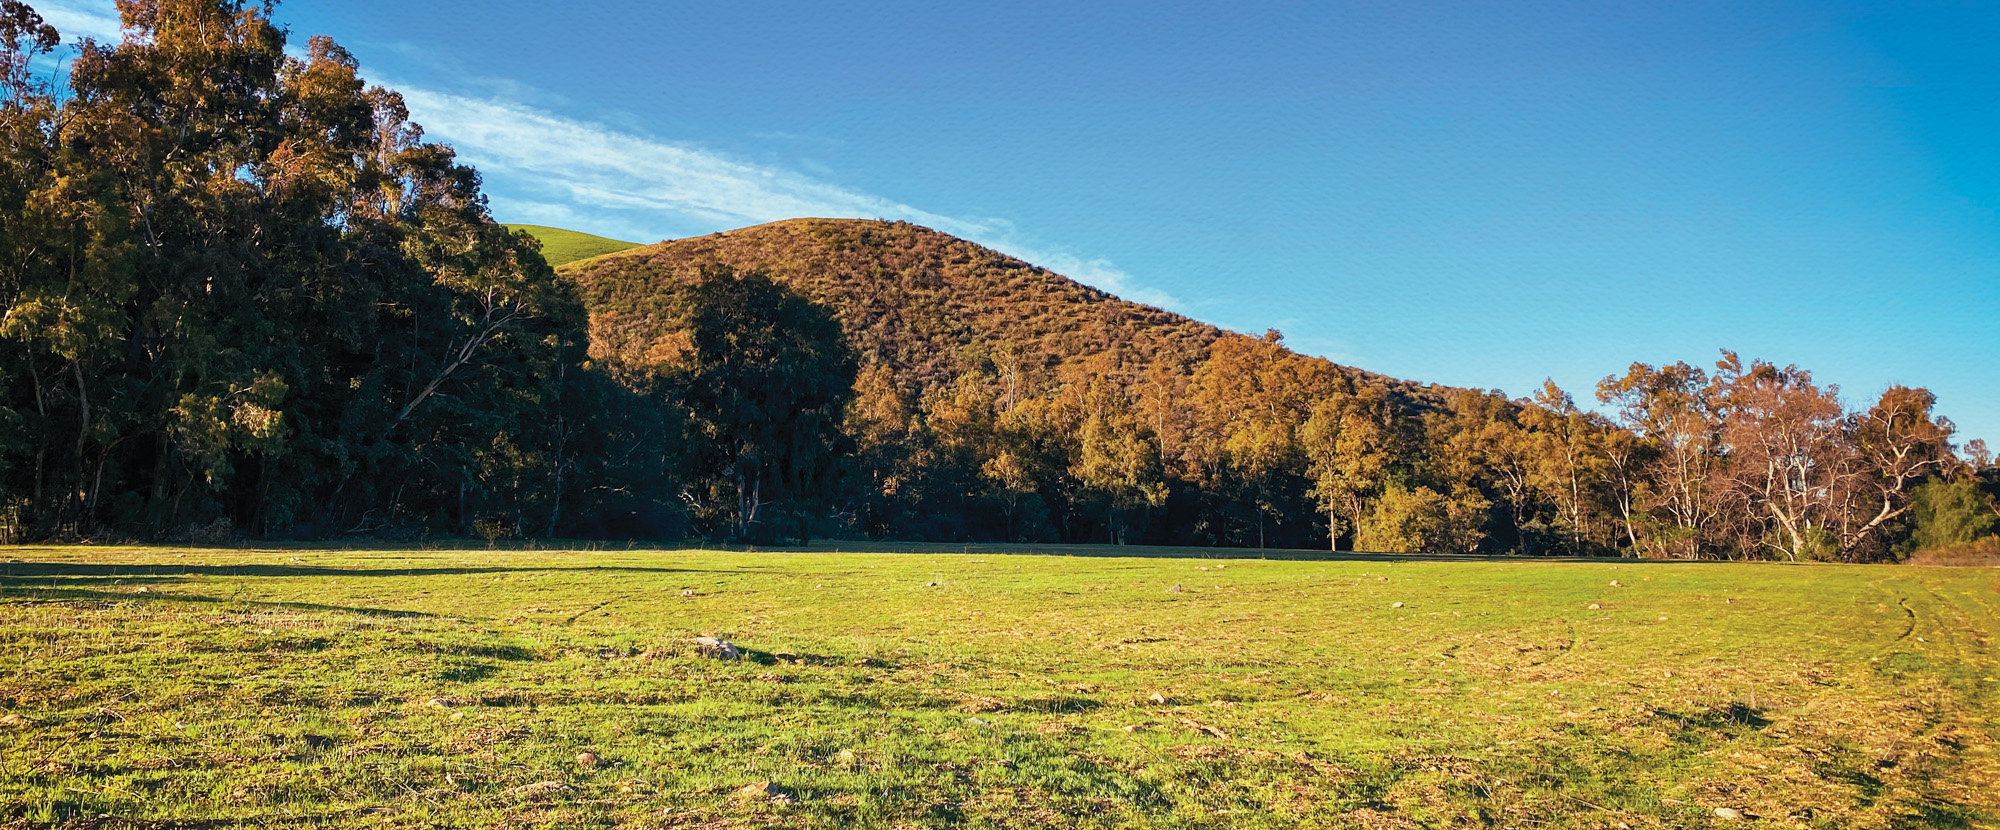 hills at site of enso verde